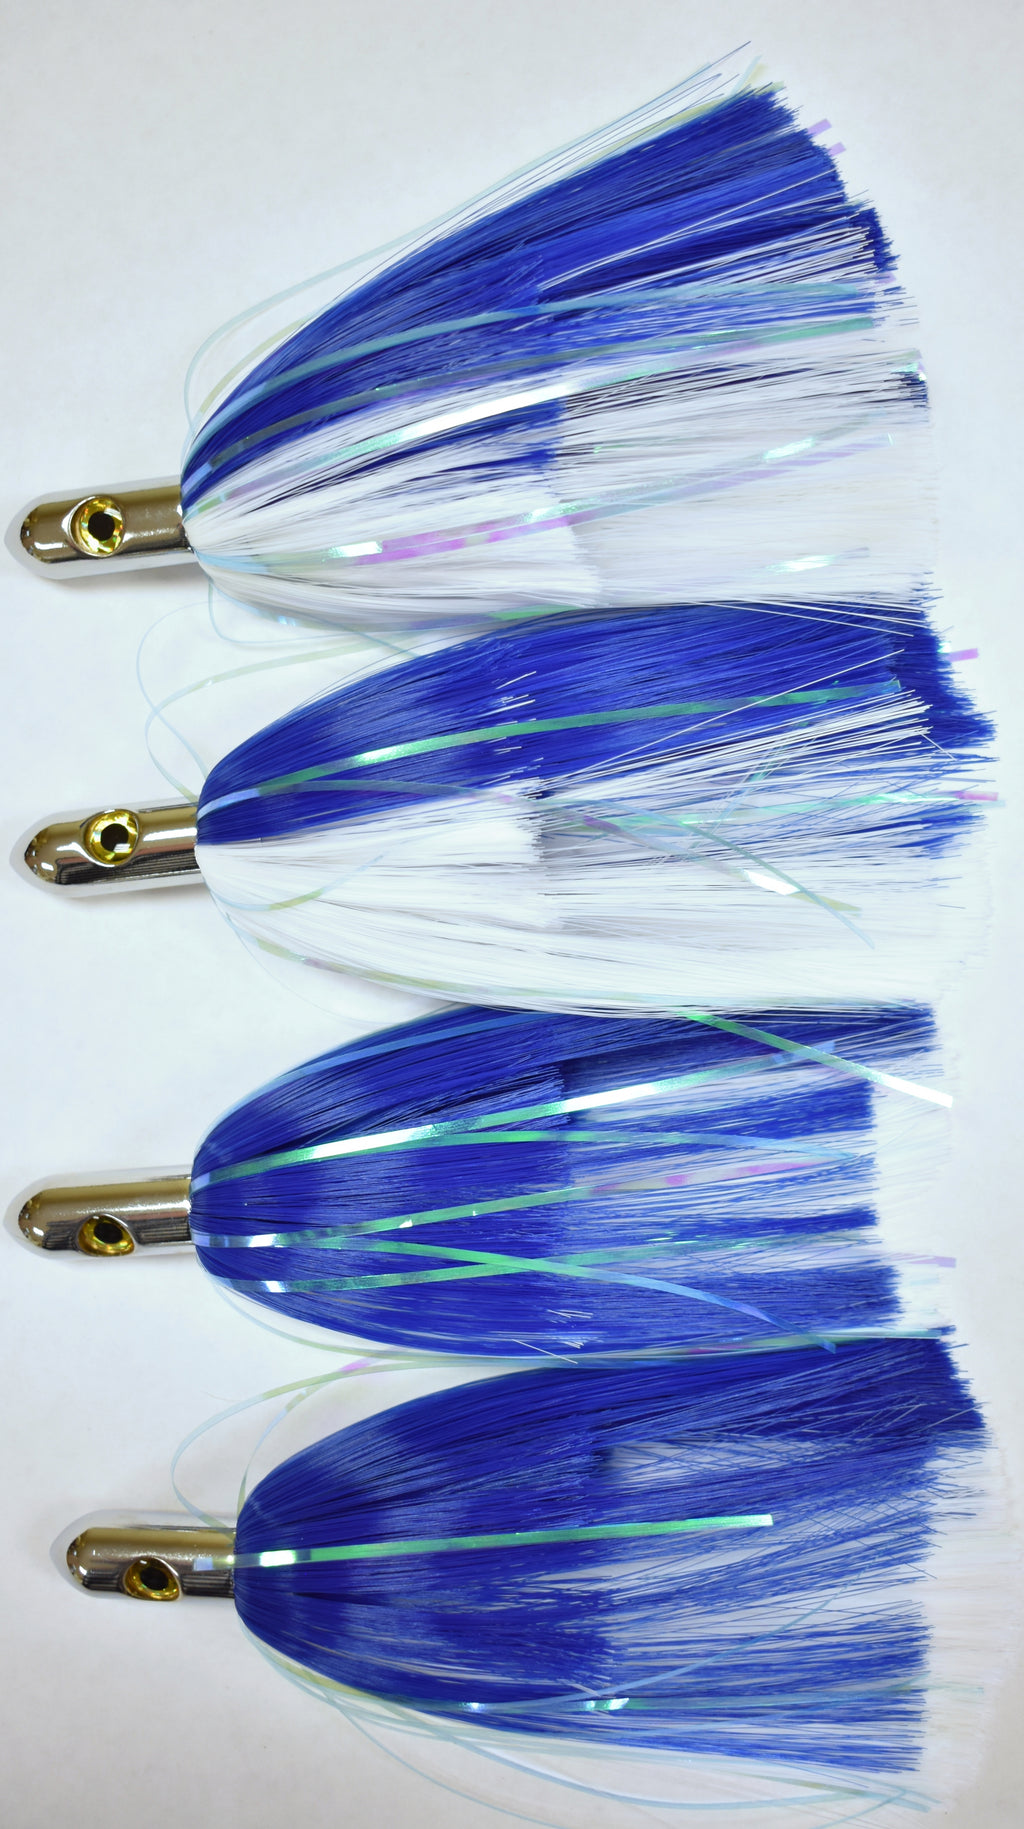 Blue & White Ilander Style Saltwater Fishing Lures - 3.2 oz. (4 Pack)